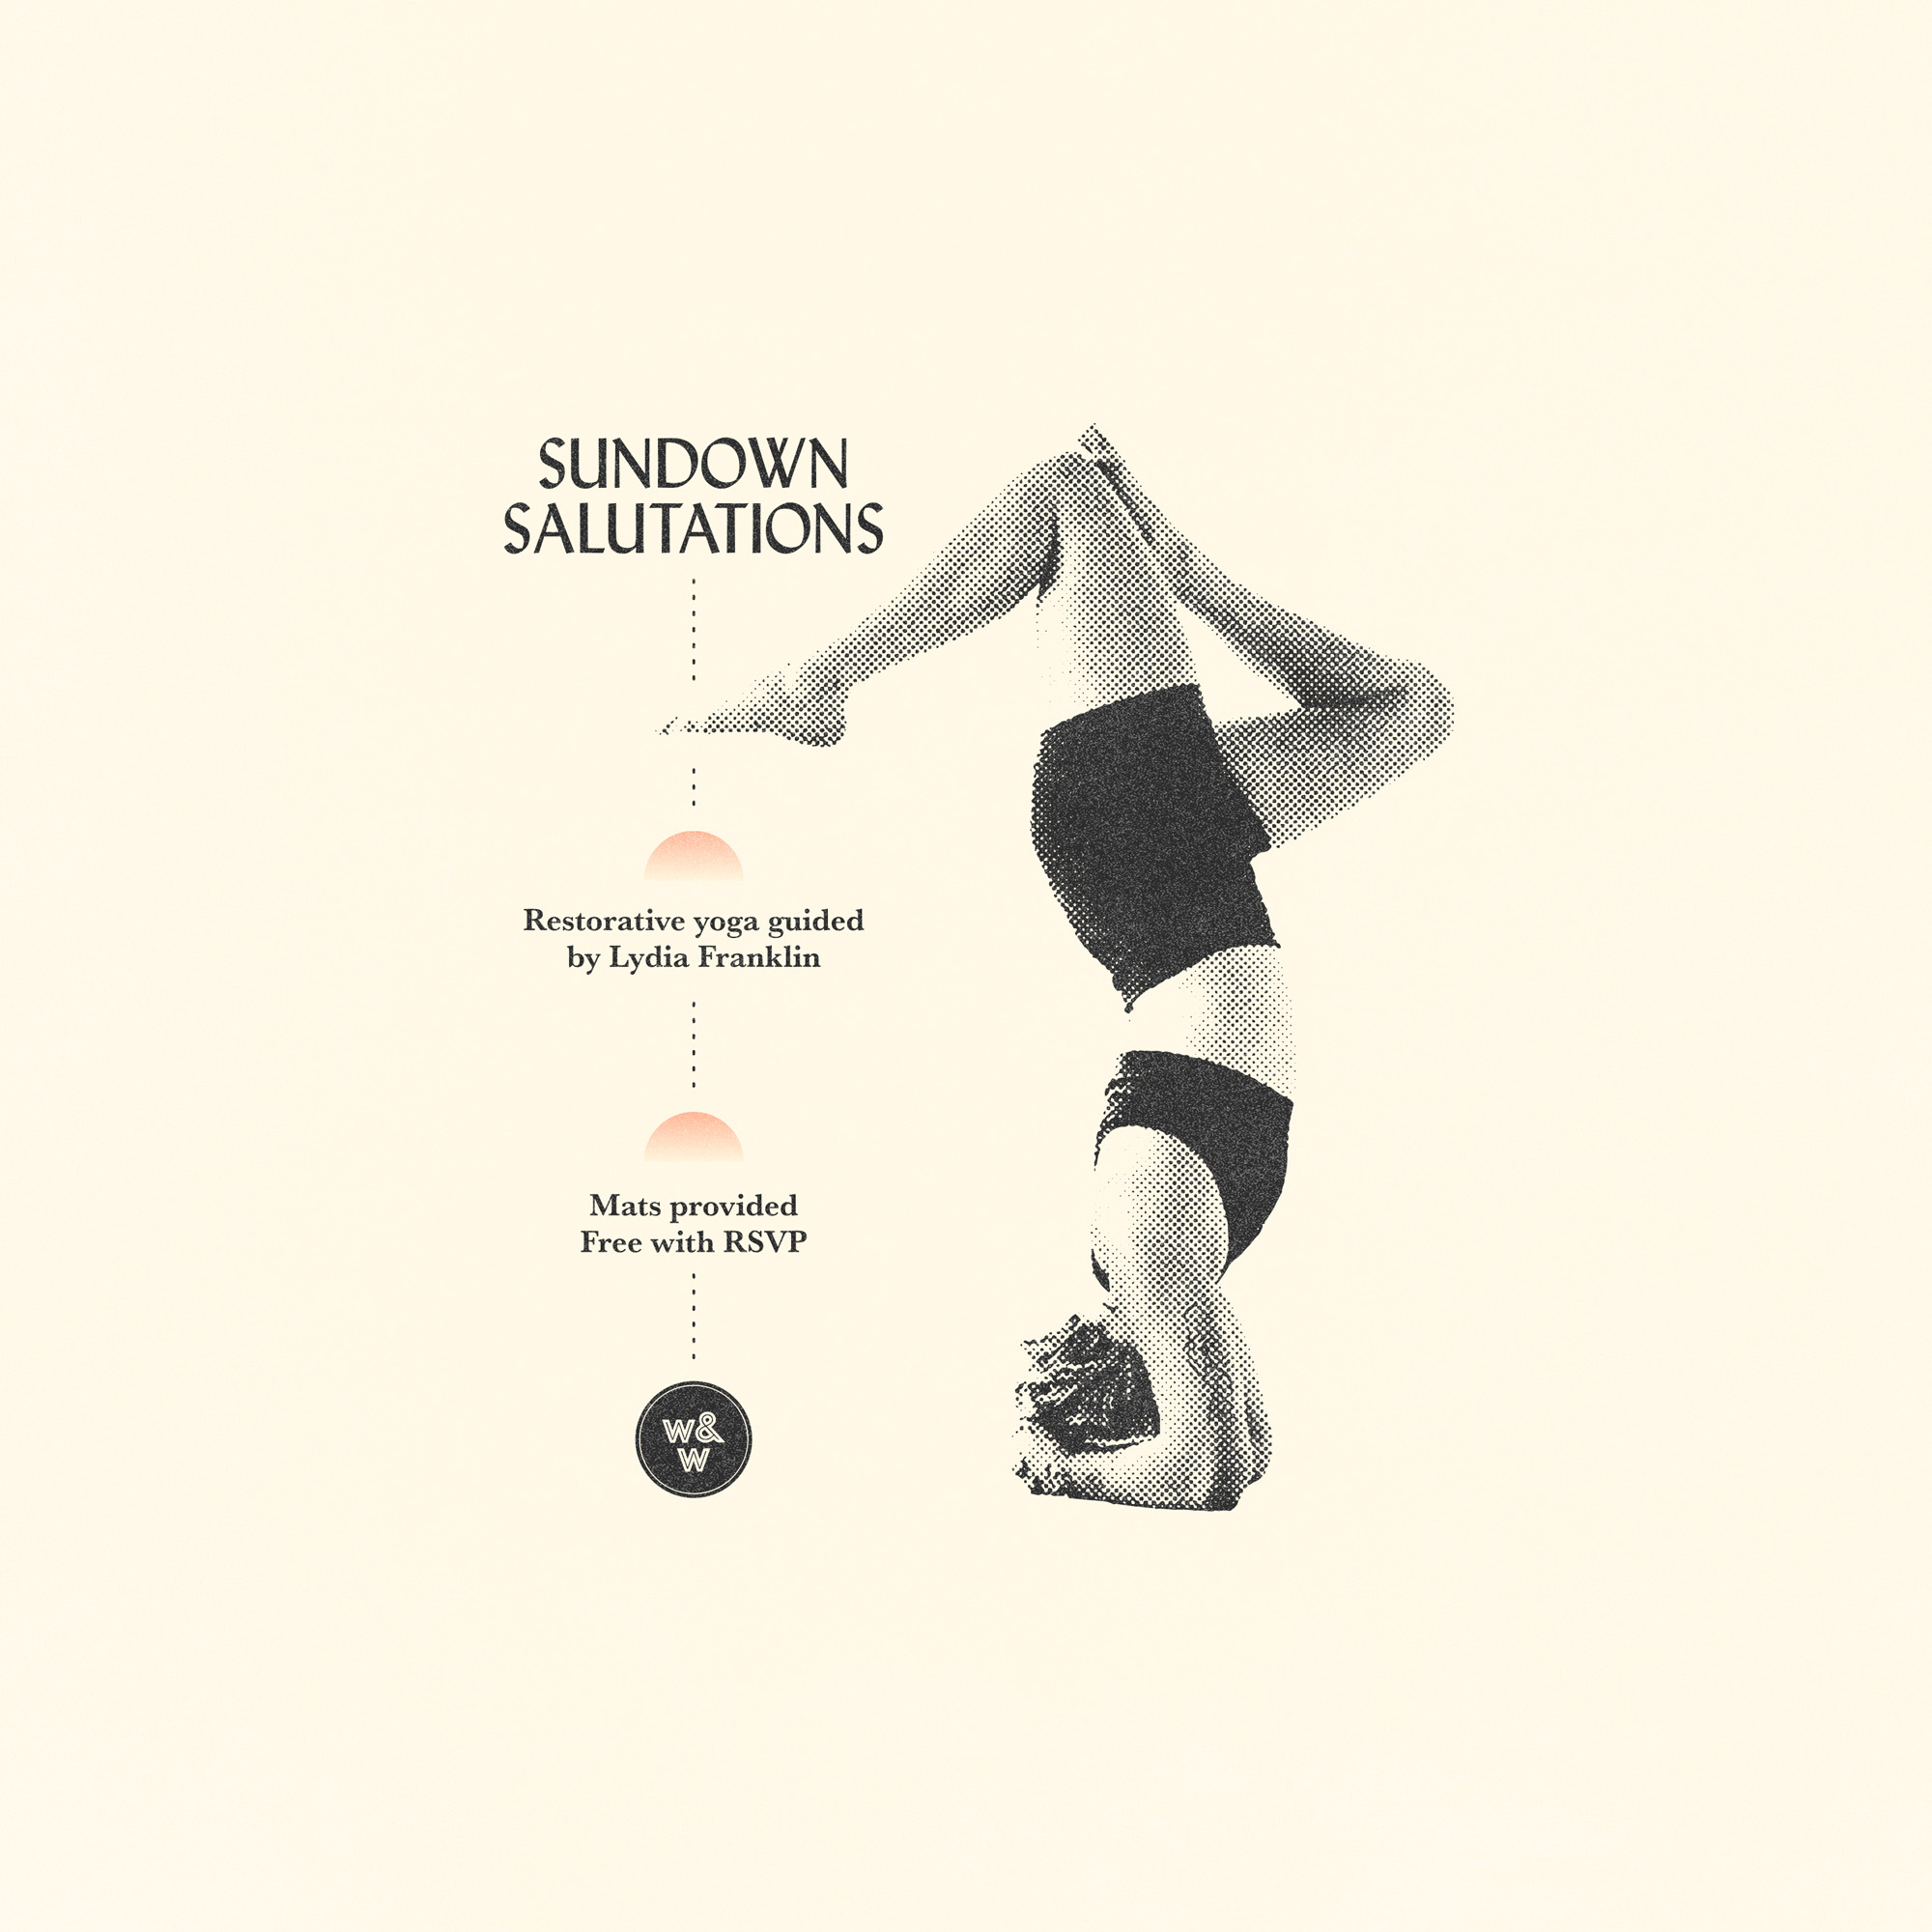 A poster for Sunday Sundown Salutations yoga class at the LINE DC